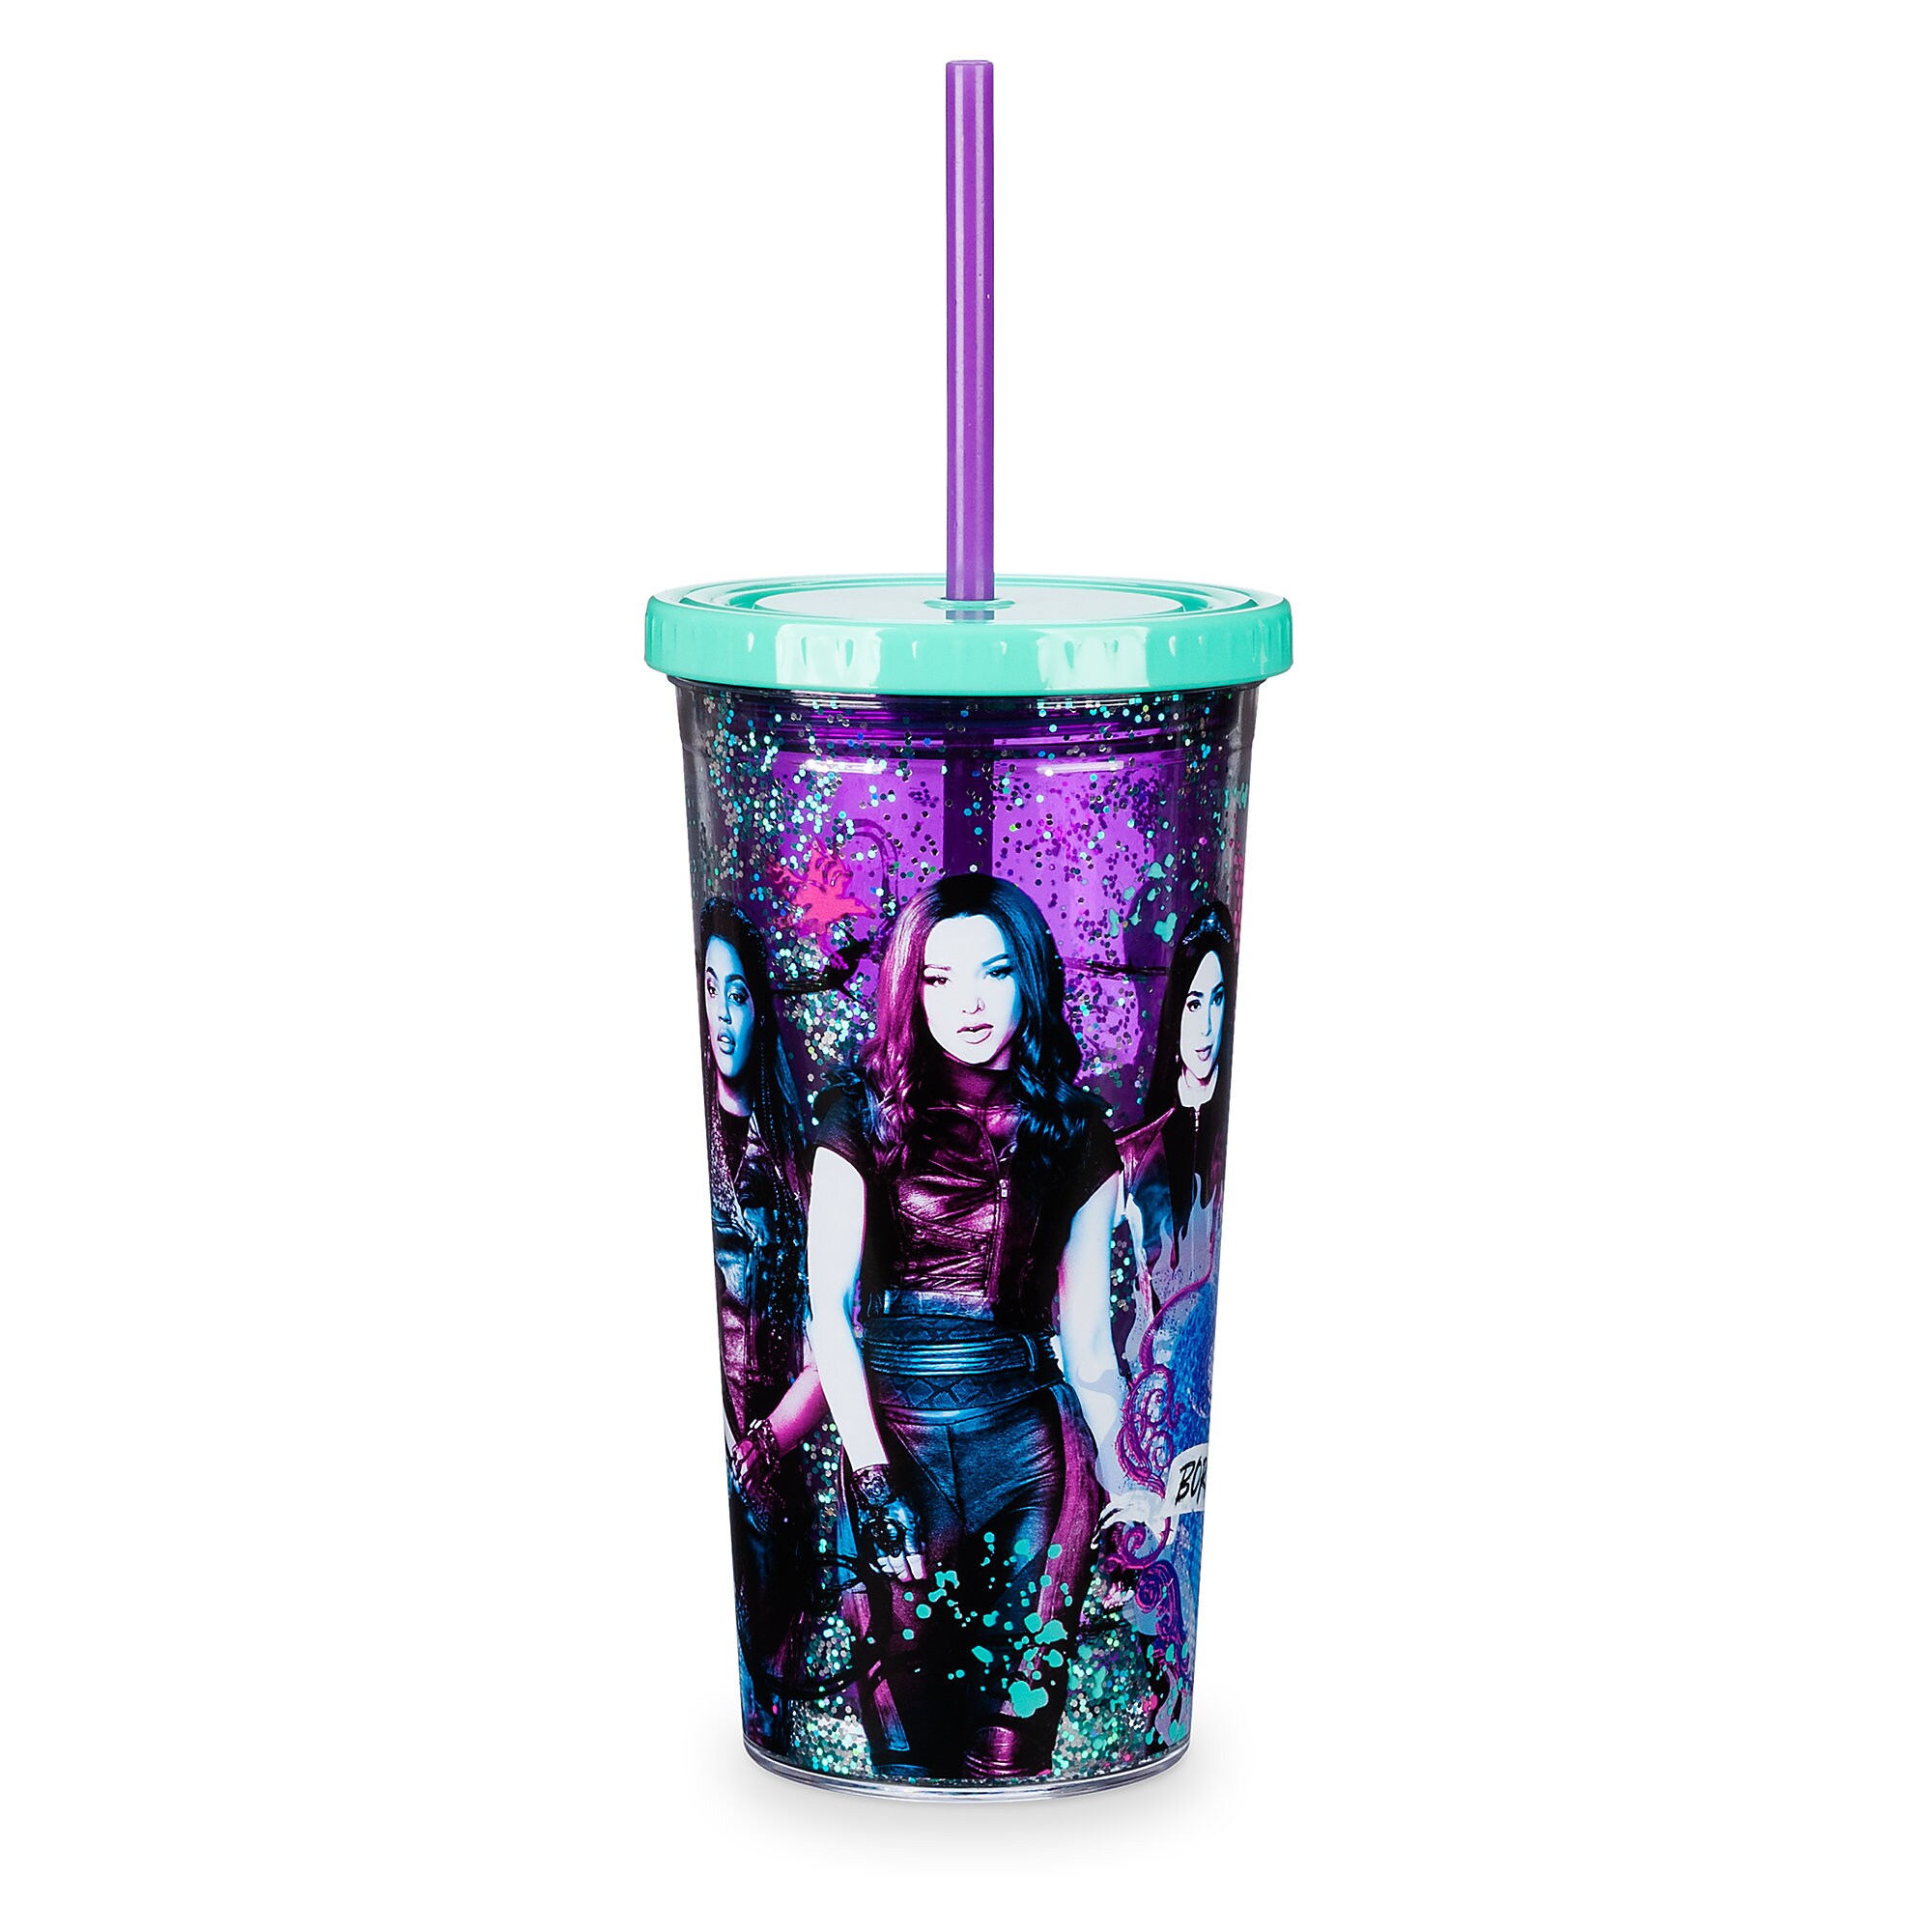 Descendants 3 Tumbler with Straw - Large